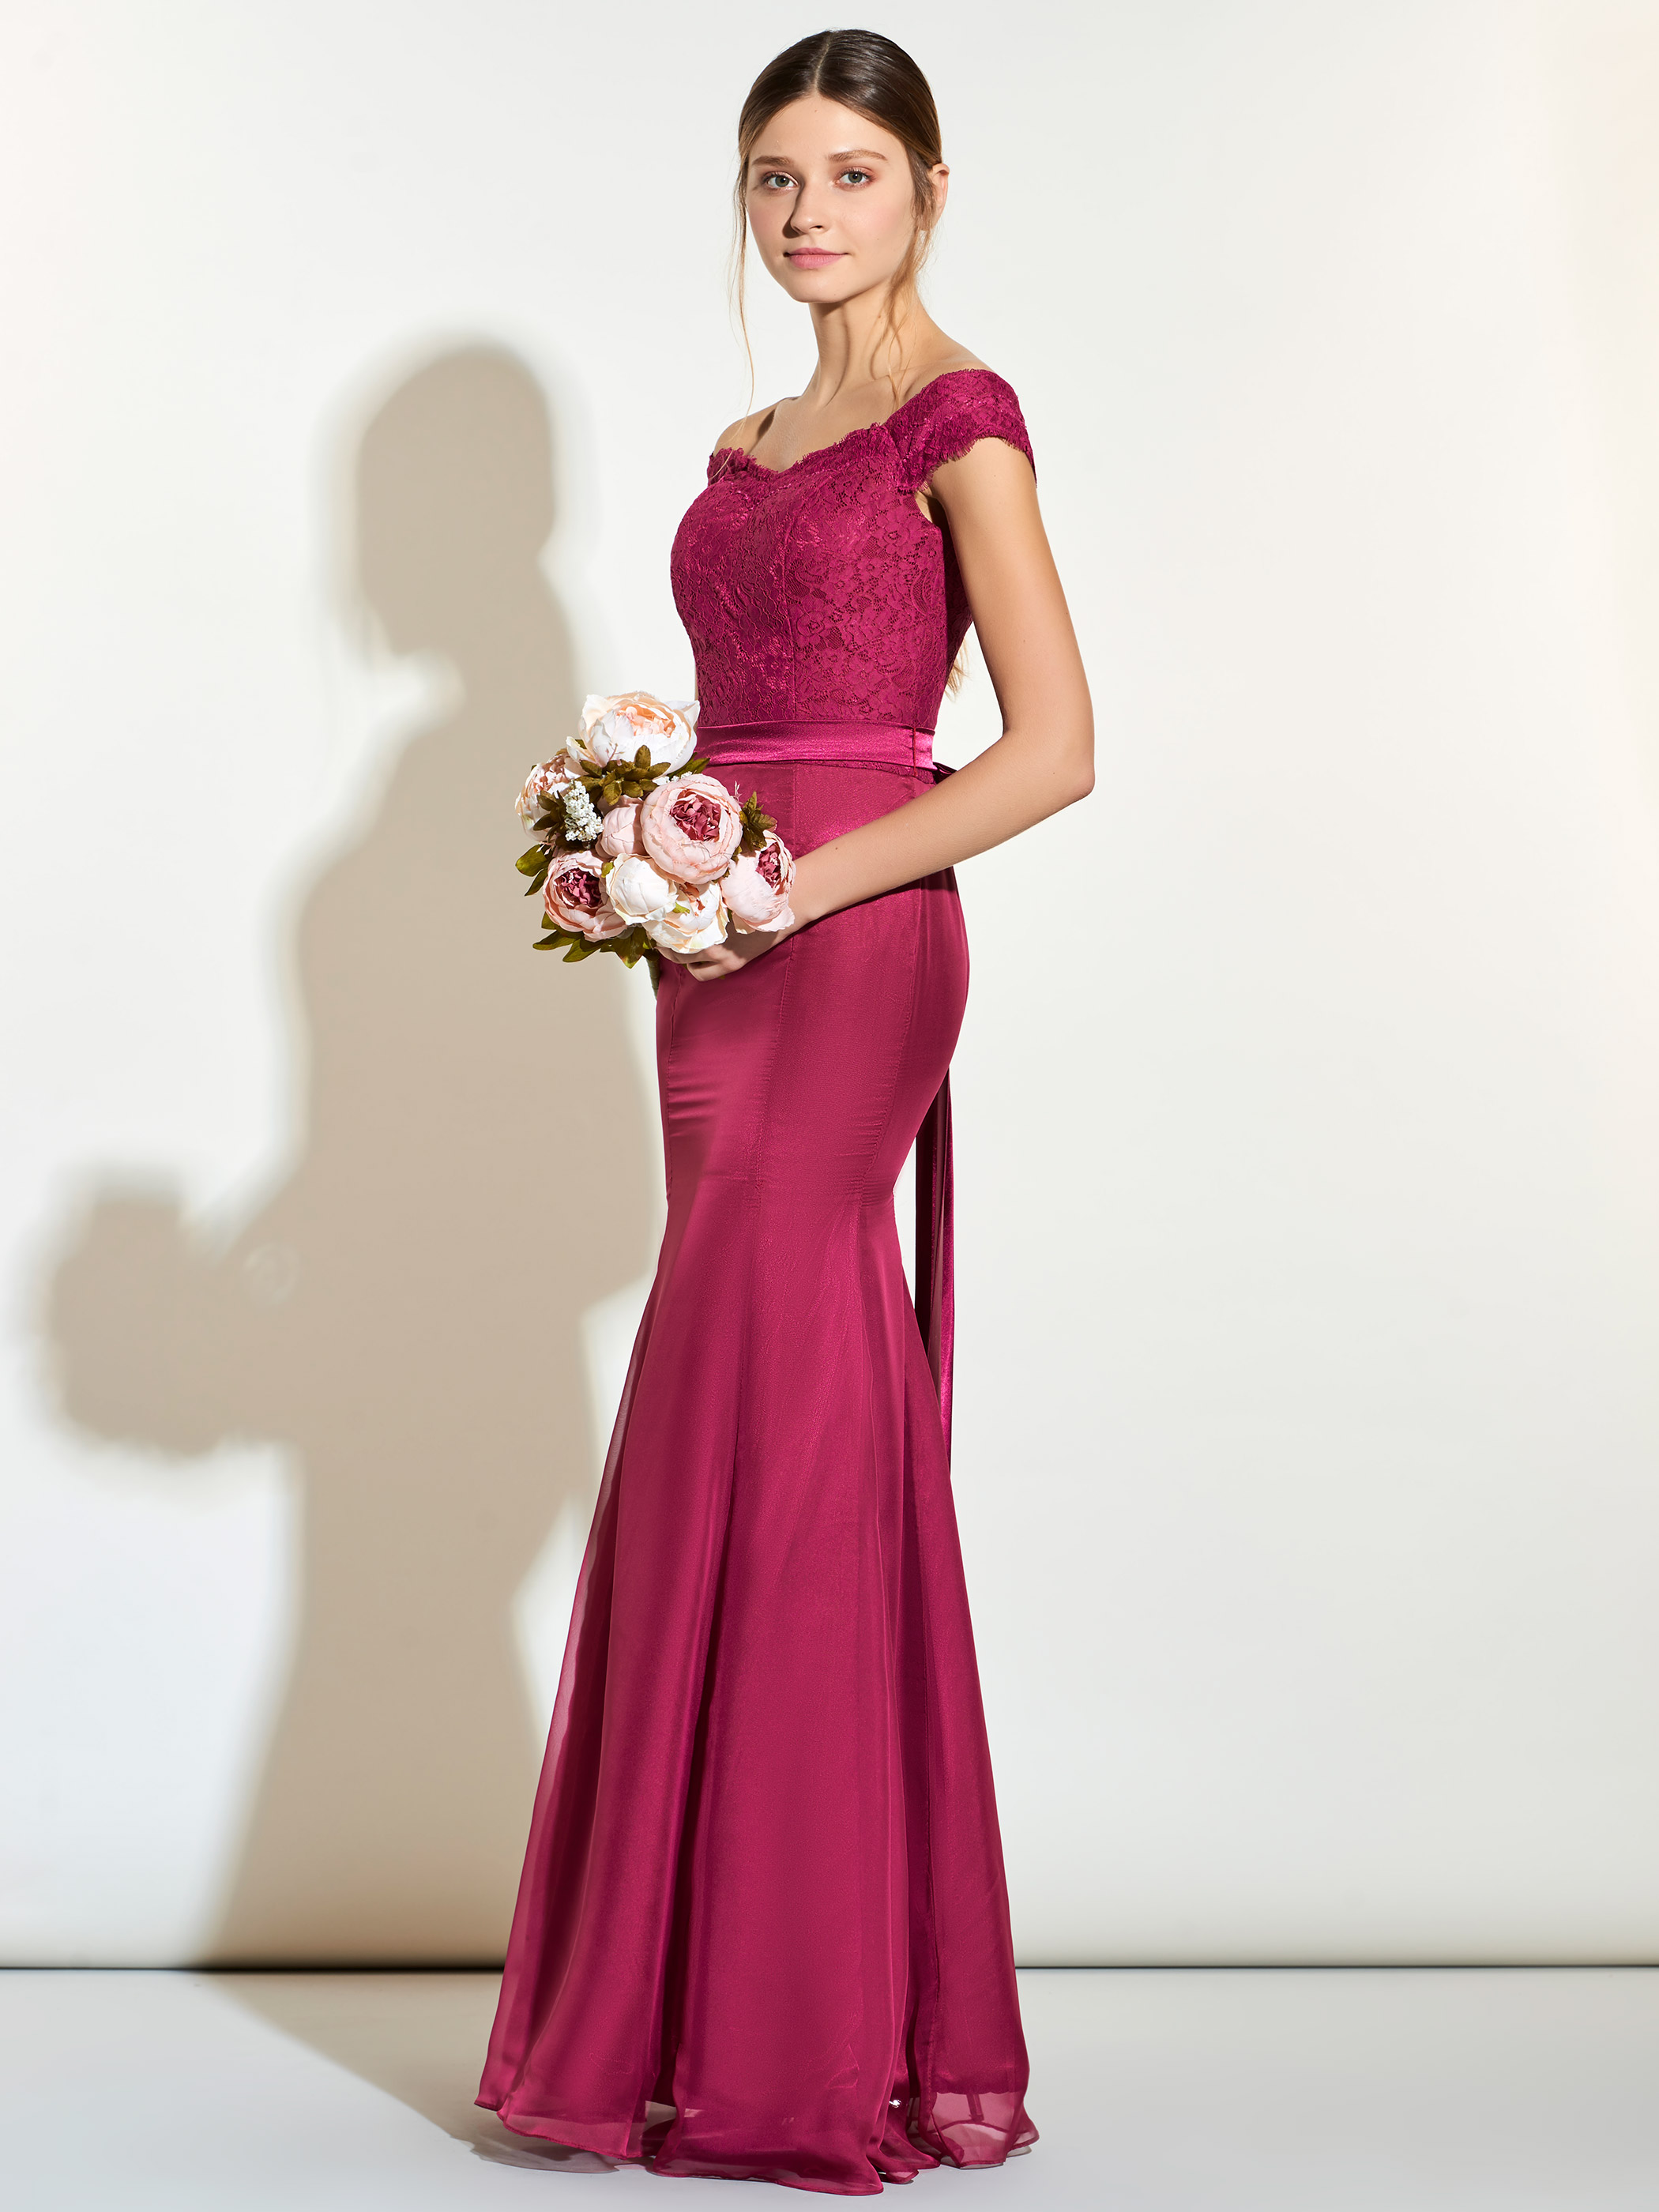 Off-The-Shoulder Lace Sashes Mermaid Bridesmaid Dress-www.tbdress.com